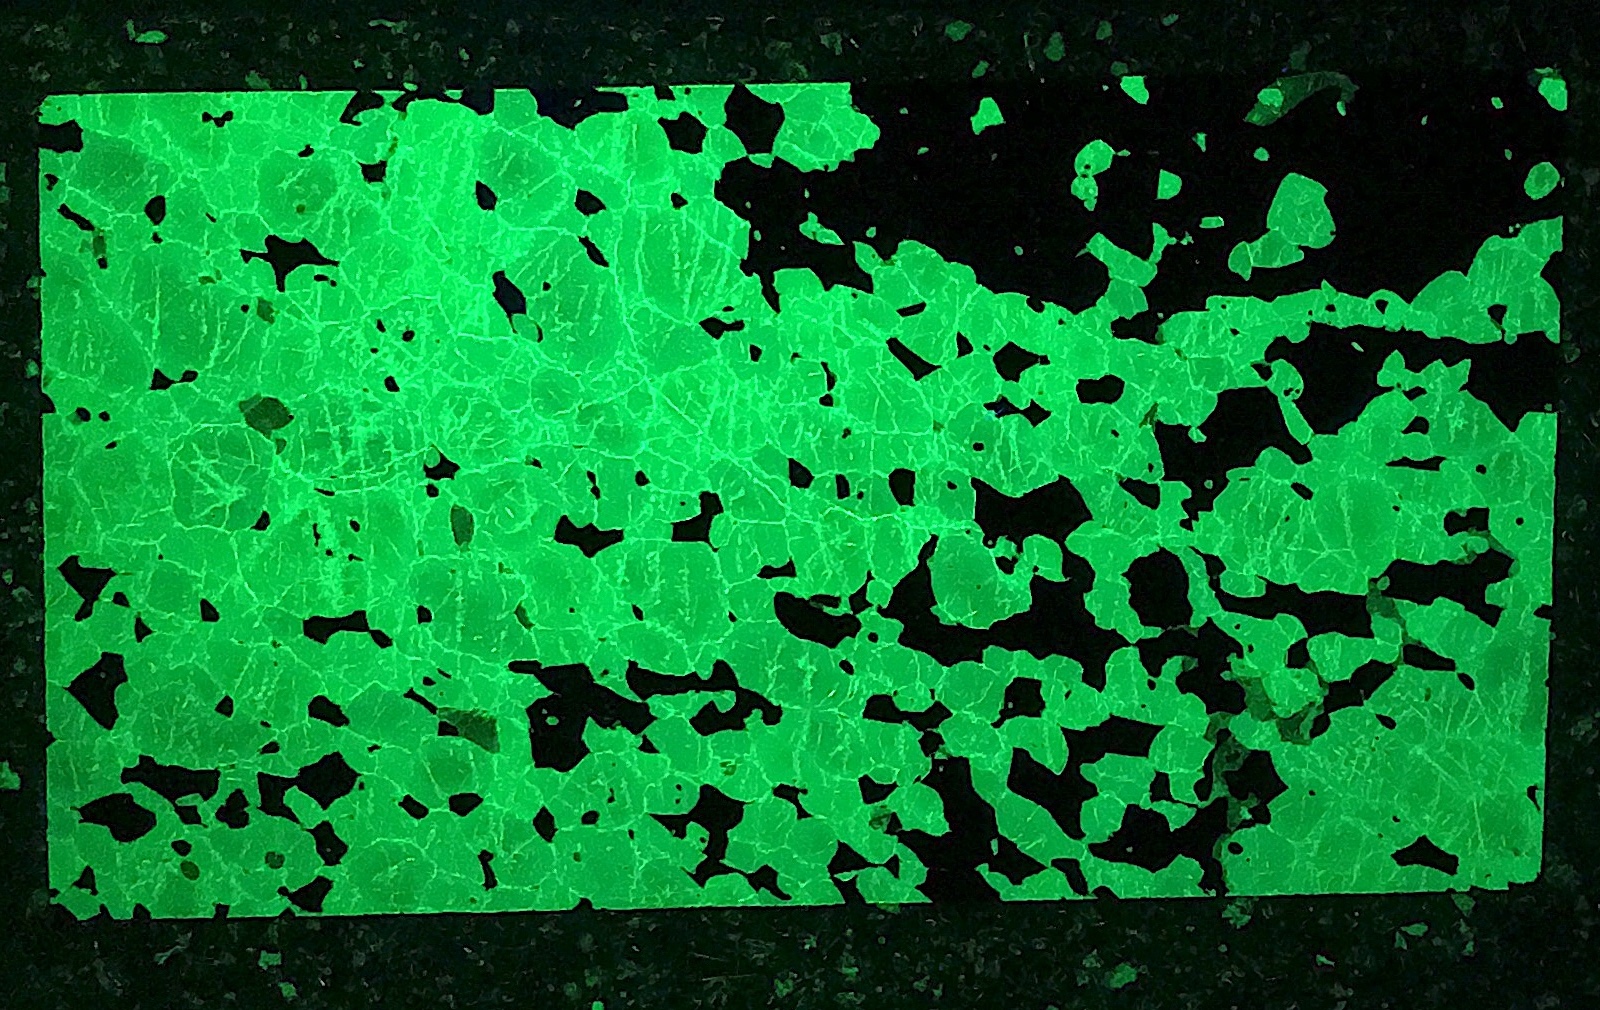 Franklin New Jersey willemite ore in thin section under UV light